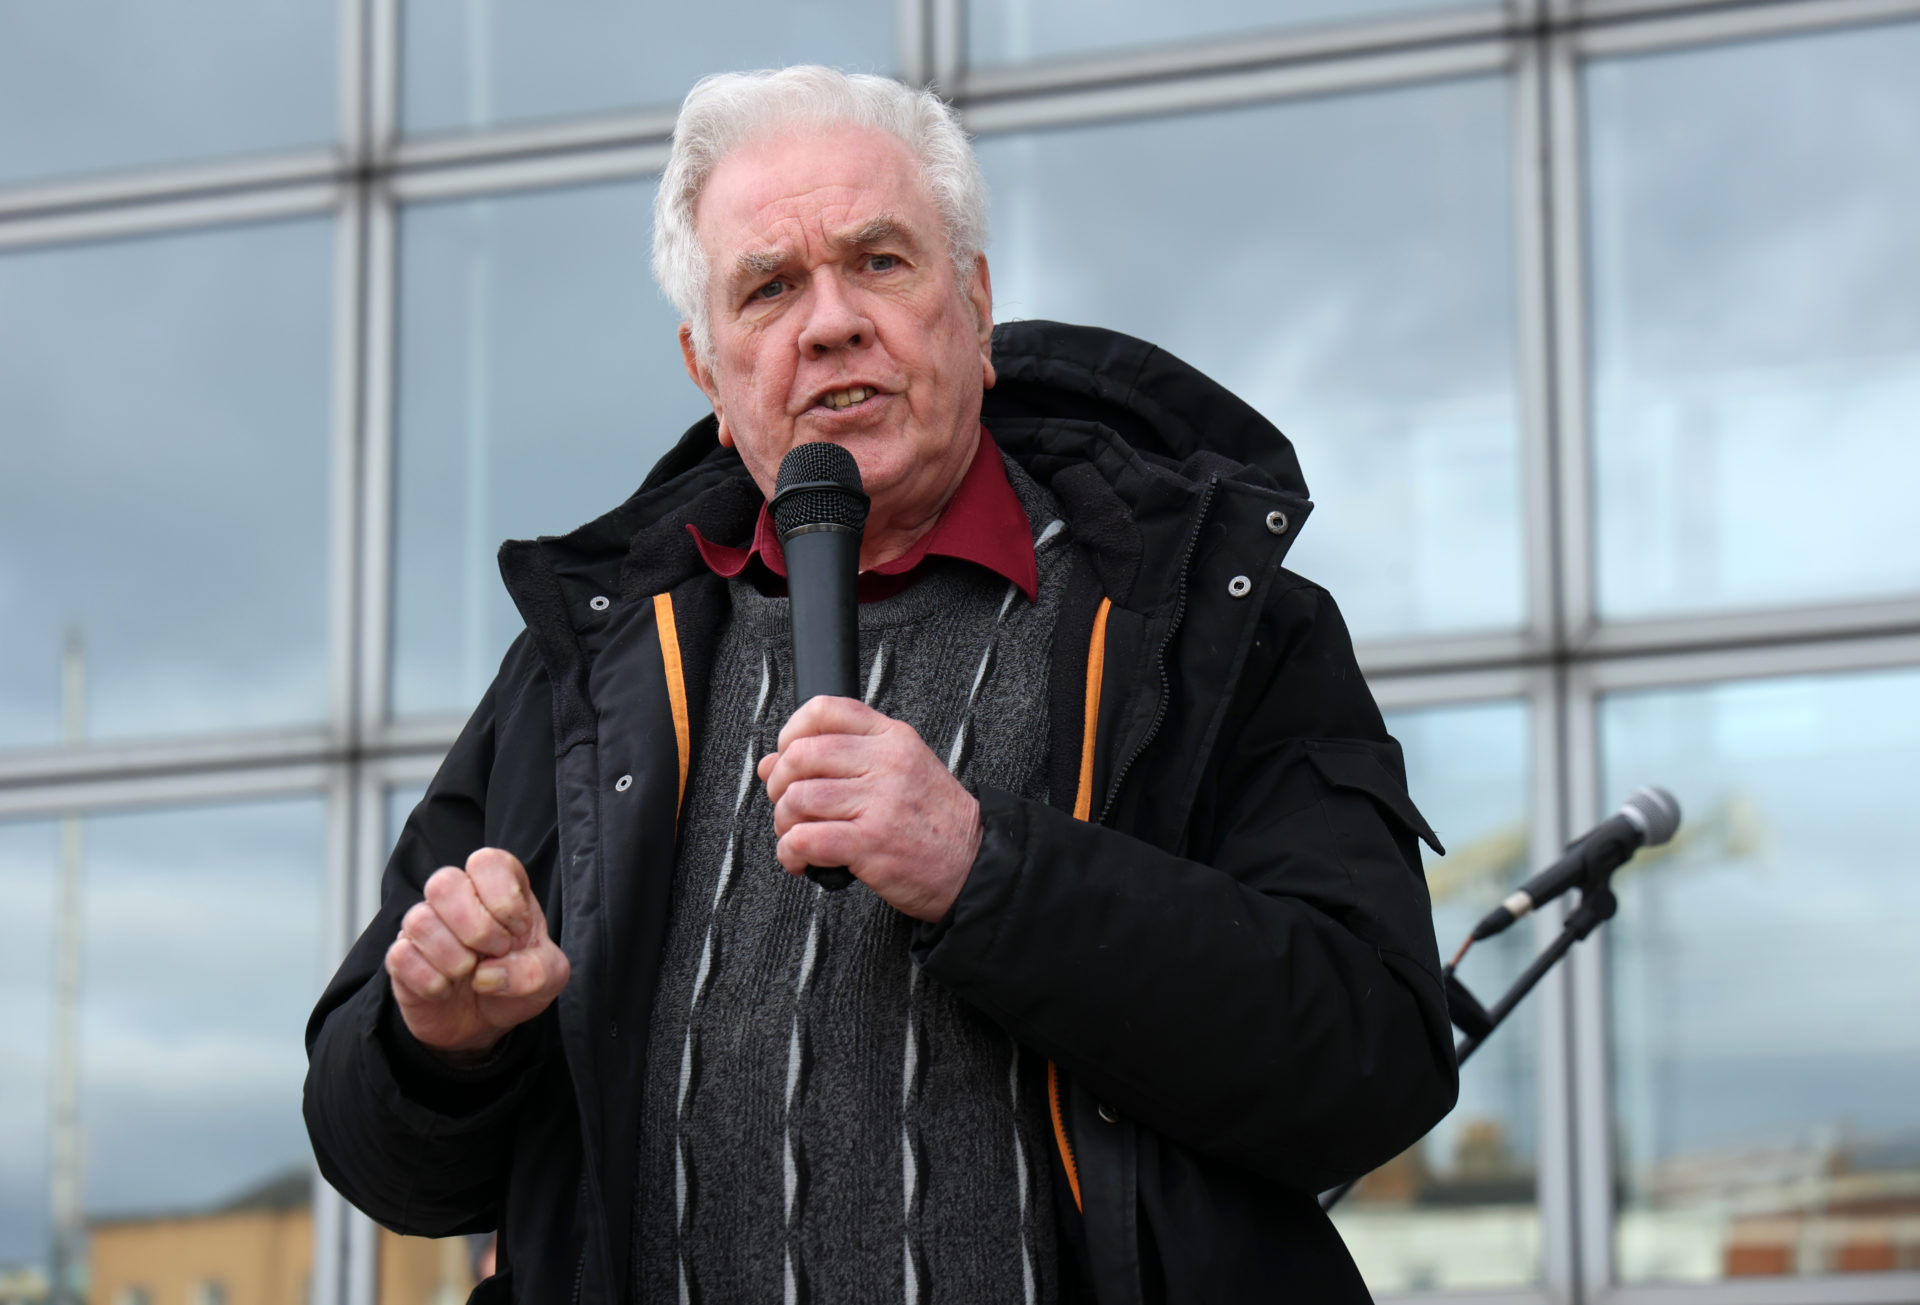 Fr Peter McVerry speaking to protesters facing eviction from Tierney House protesting outside Dublin County Council offices on Wood Quay